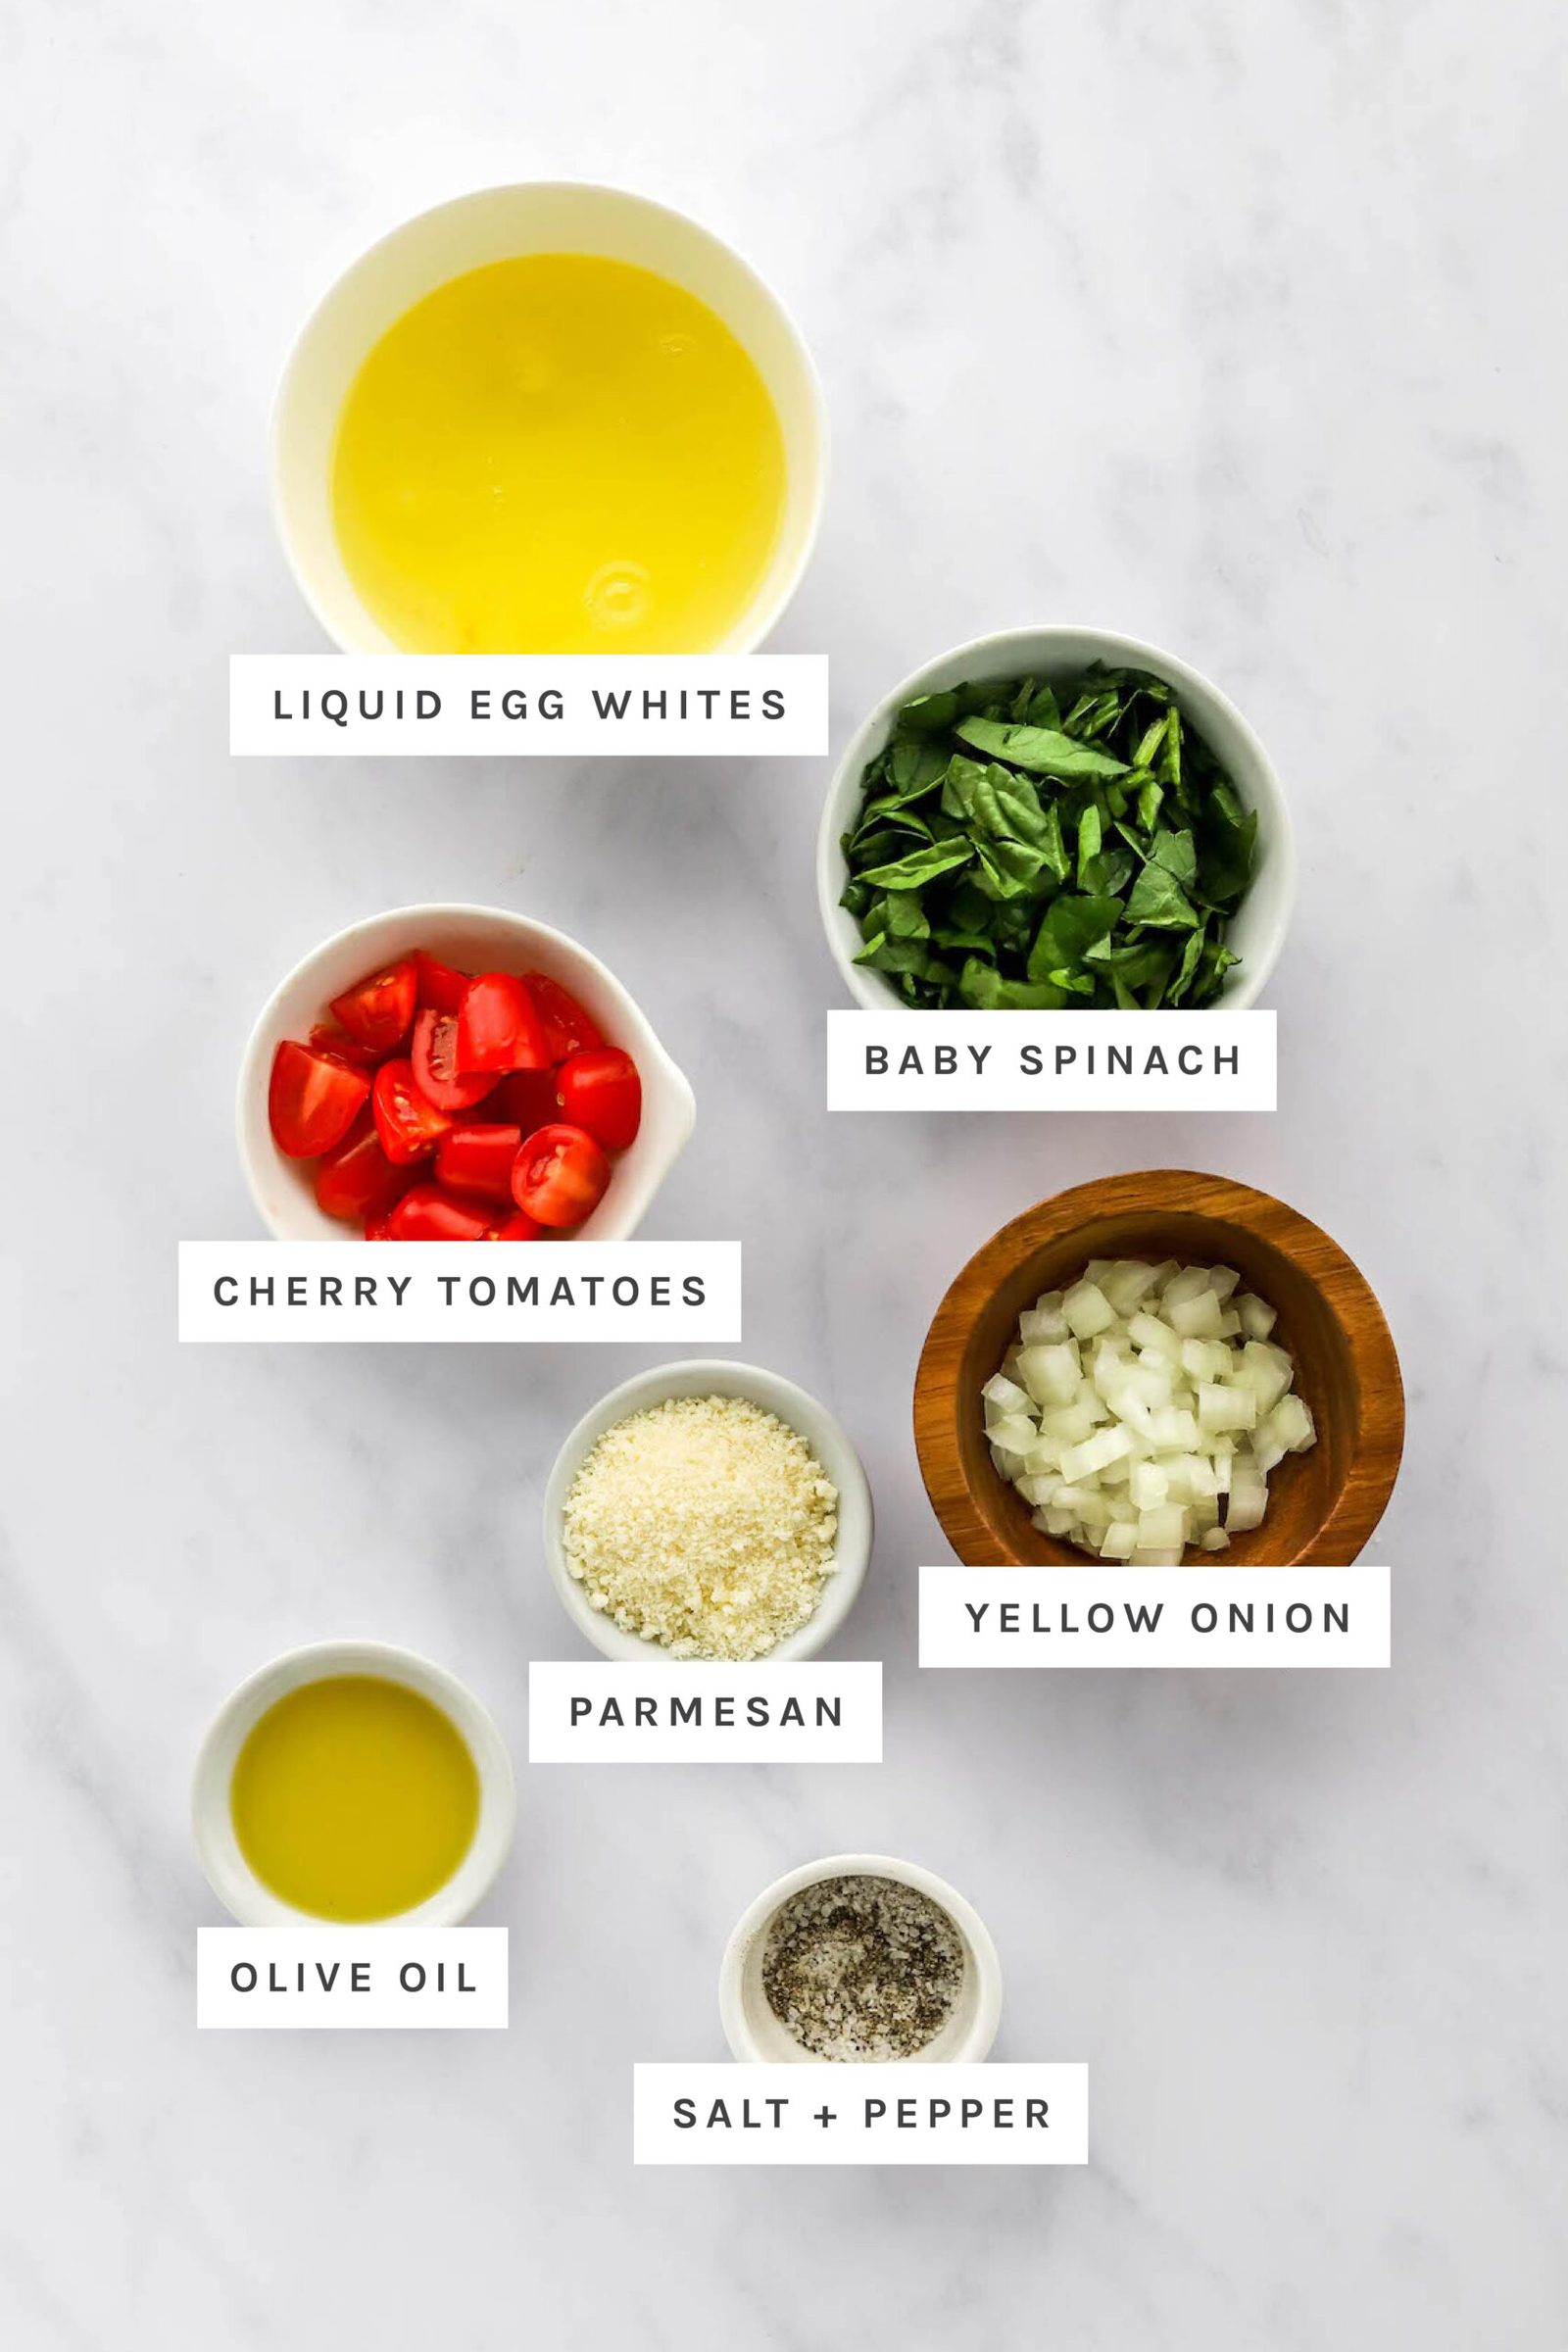 Ingredients measured out to make an egg white omelette: liquid egg whites, baby spinach, cherry tomatoes, yellow onion, parmesan, olive oil, salt and pepper.